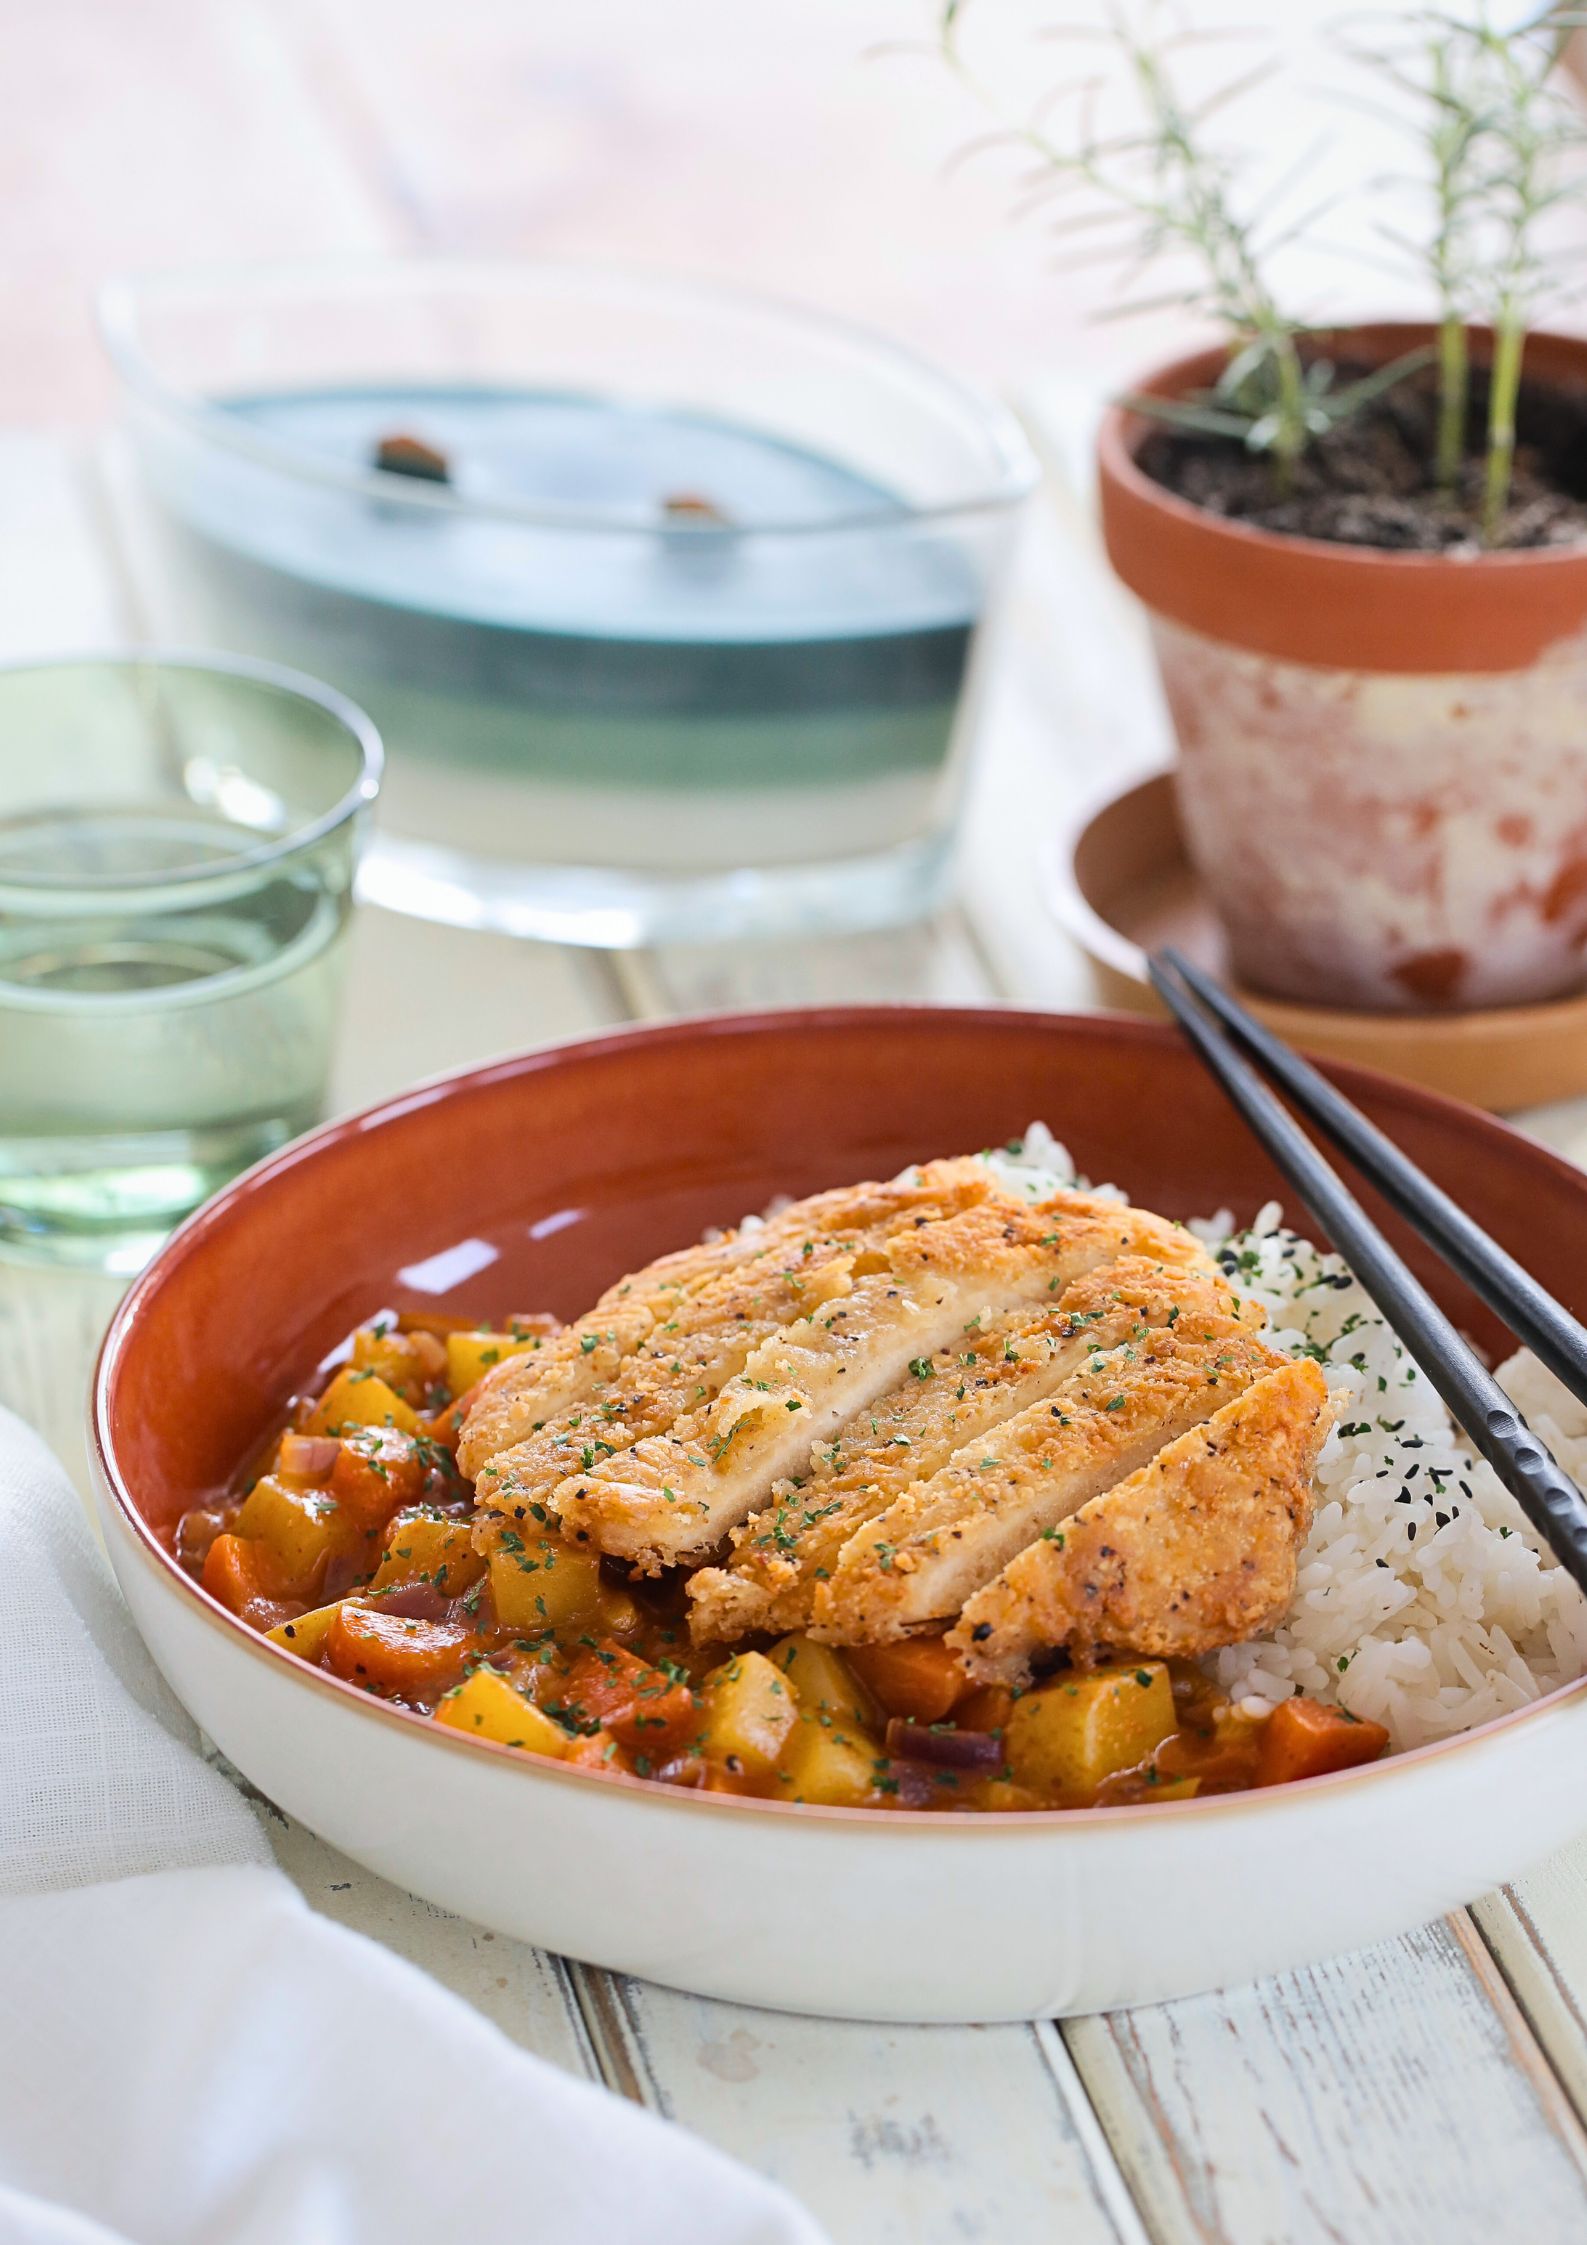 This homemade vegan chicken Katsu curry is so tasty and easy to make! It's a very popular Japanese restaurant dish of crisp fried 'chicken' with a simple but punchy Japanese curry sauce. And it's all ready in around 30 minutes! Recipe on thecookandhim.com | #katsu #katsucurry #veganchicken #veganmeals #vegancurry